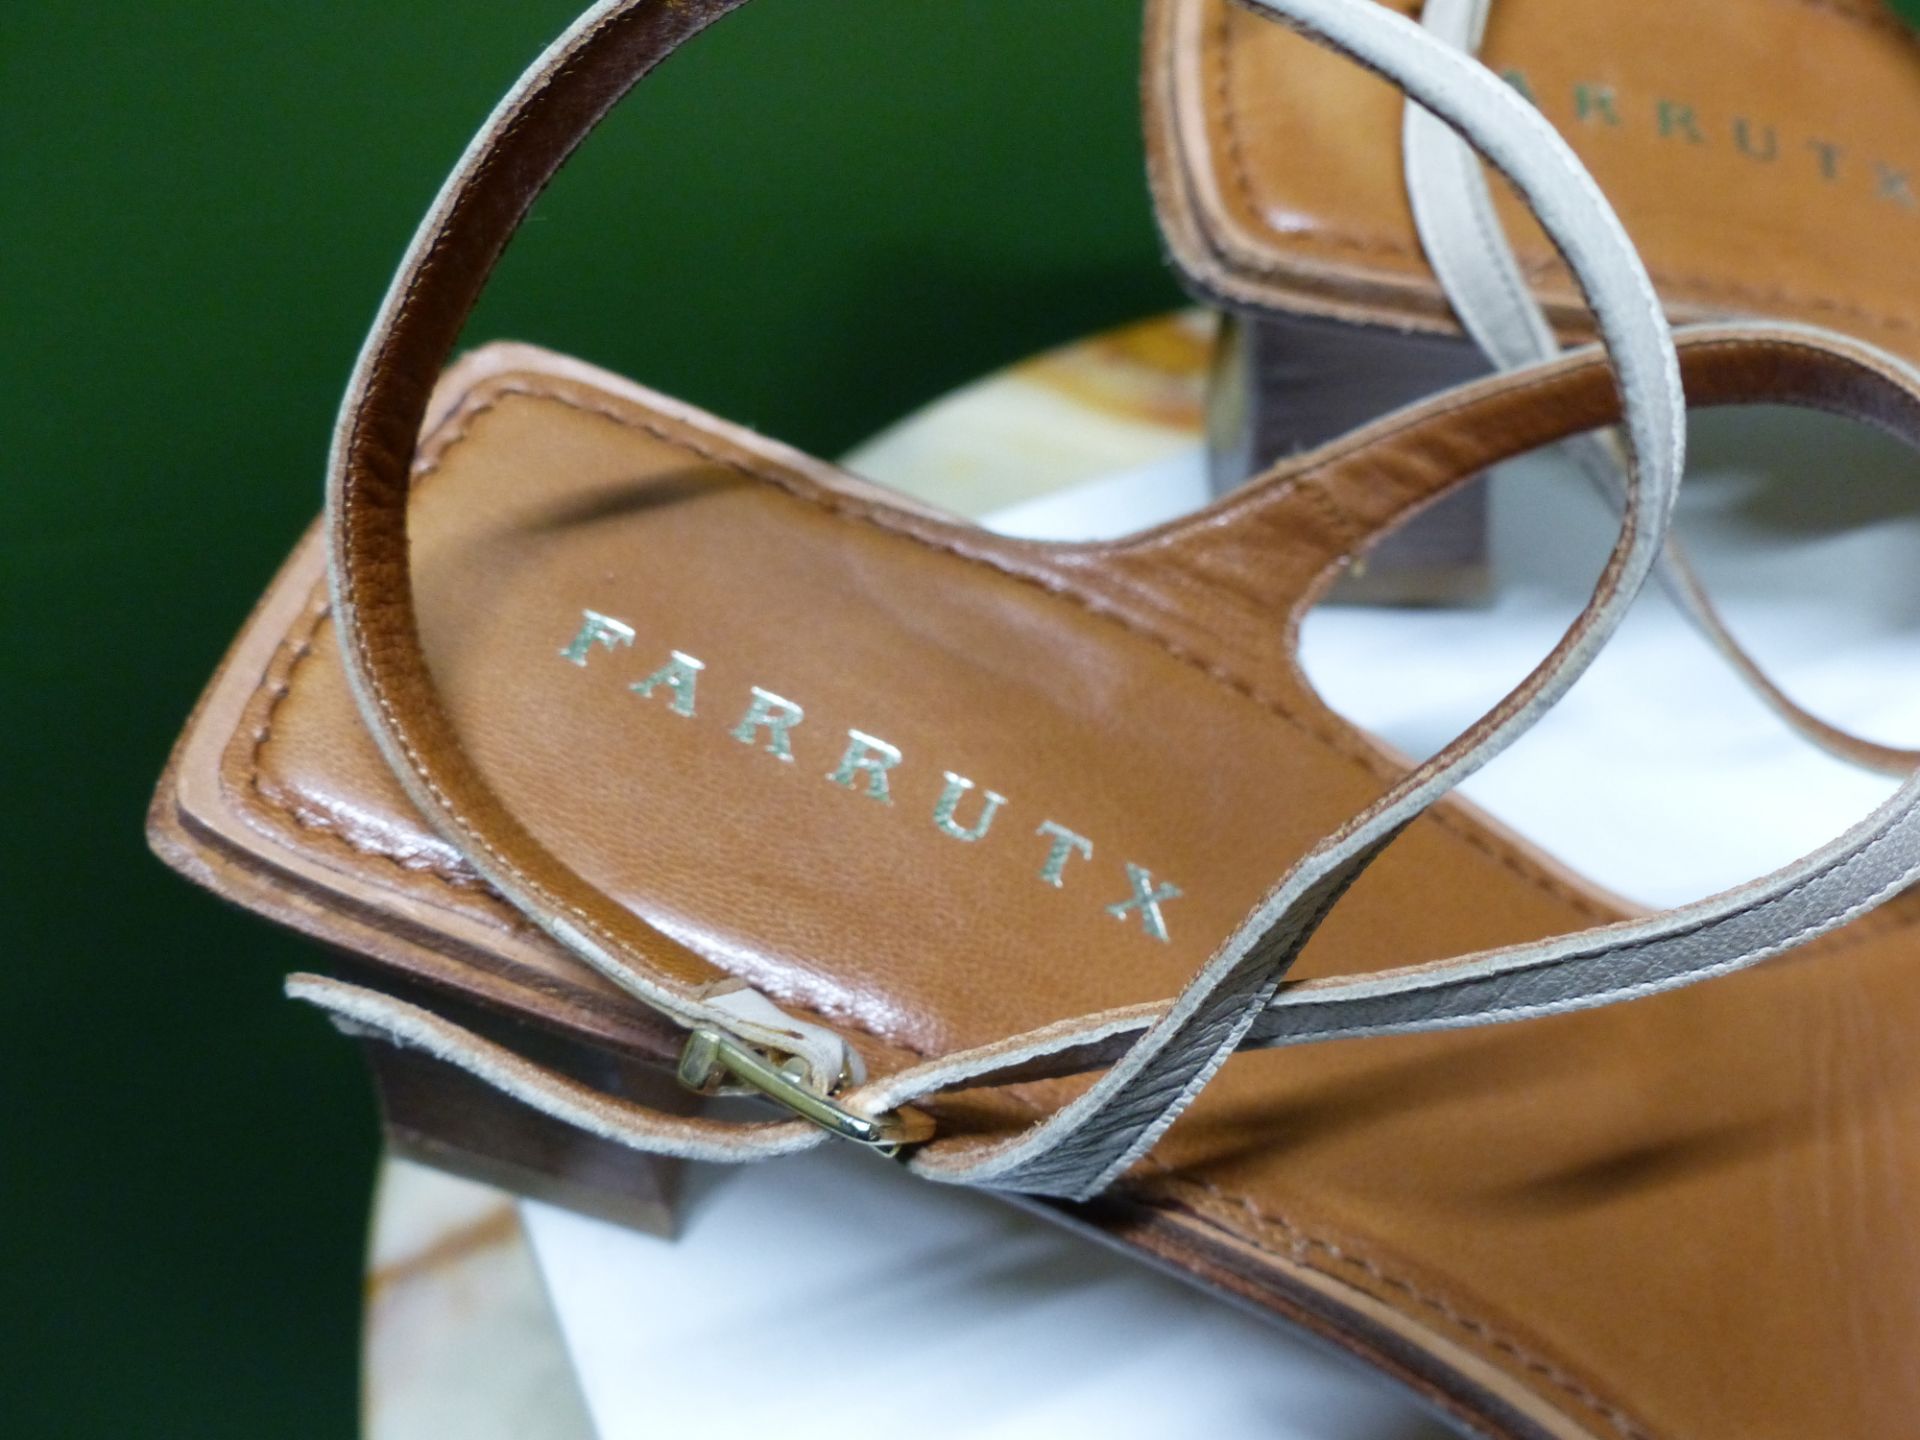 SHOES. FARRUTX SPANISH BEIGE LEATHER BUCKLED HEALED SANDAL EUR 40 HEAL HEIGHT 5cm - Image 2 of 5